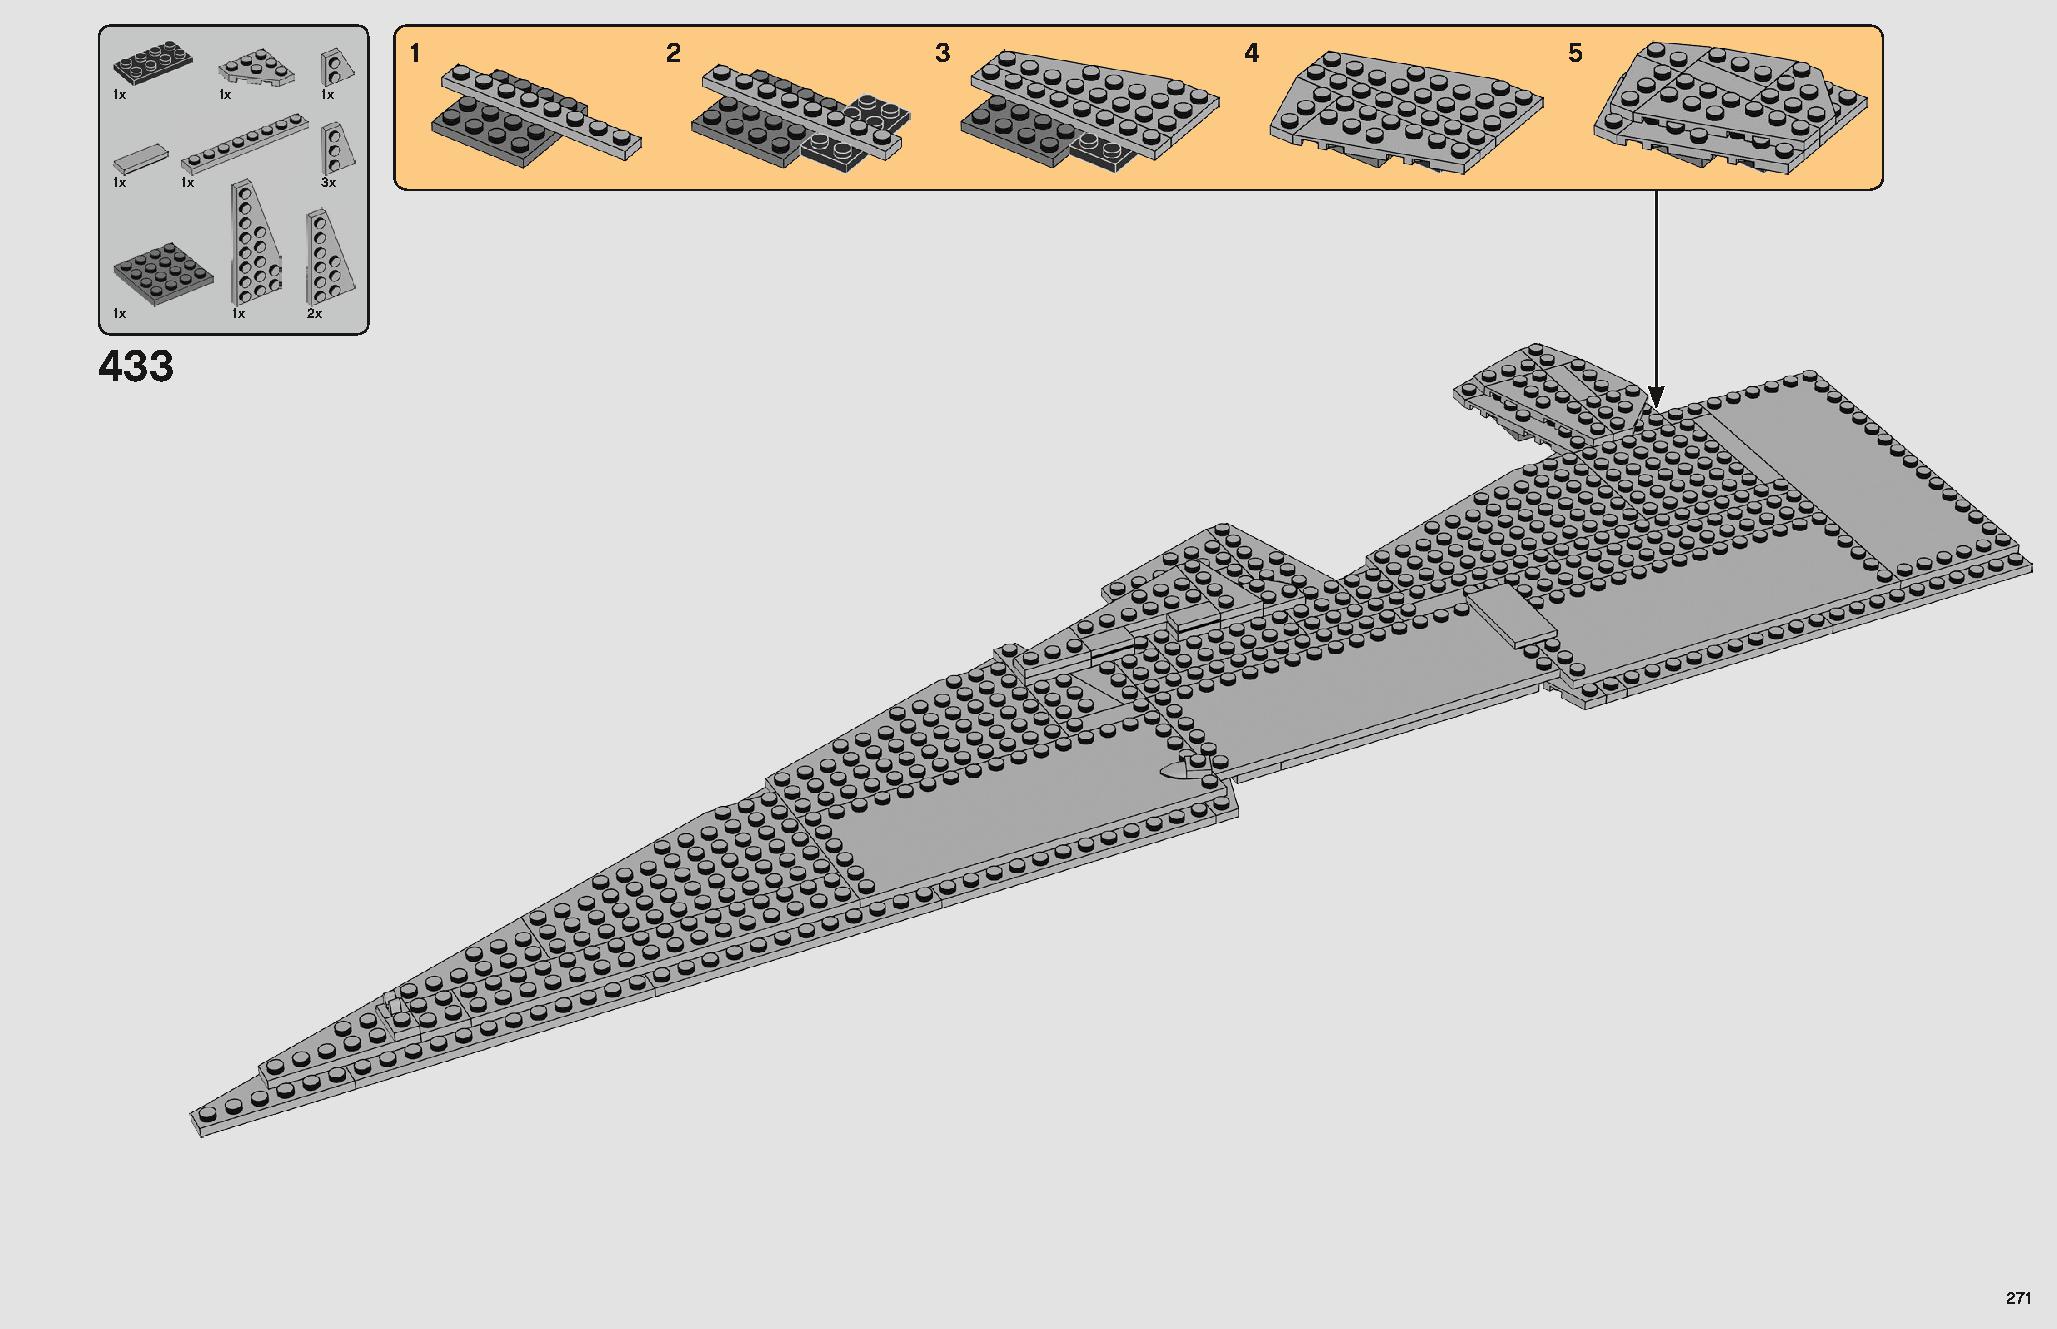 Imperial Star Destroyer 75252 レゴの商品情報 レゴの説明書・組立方法 271 page